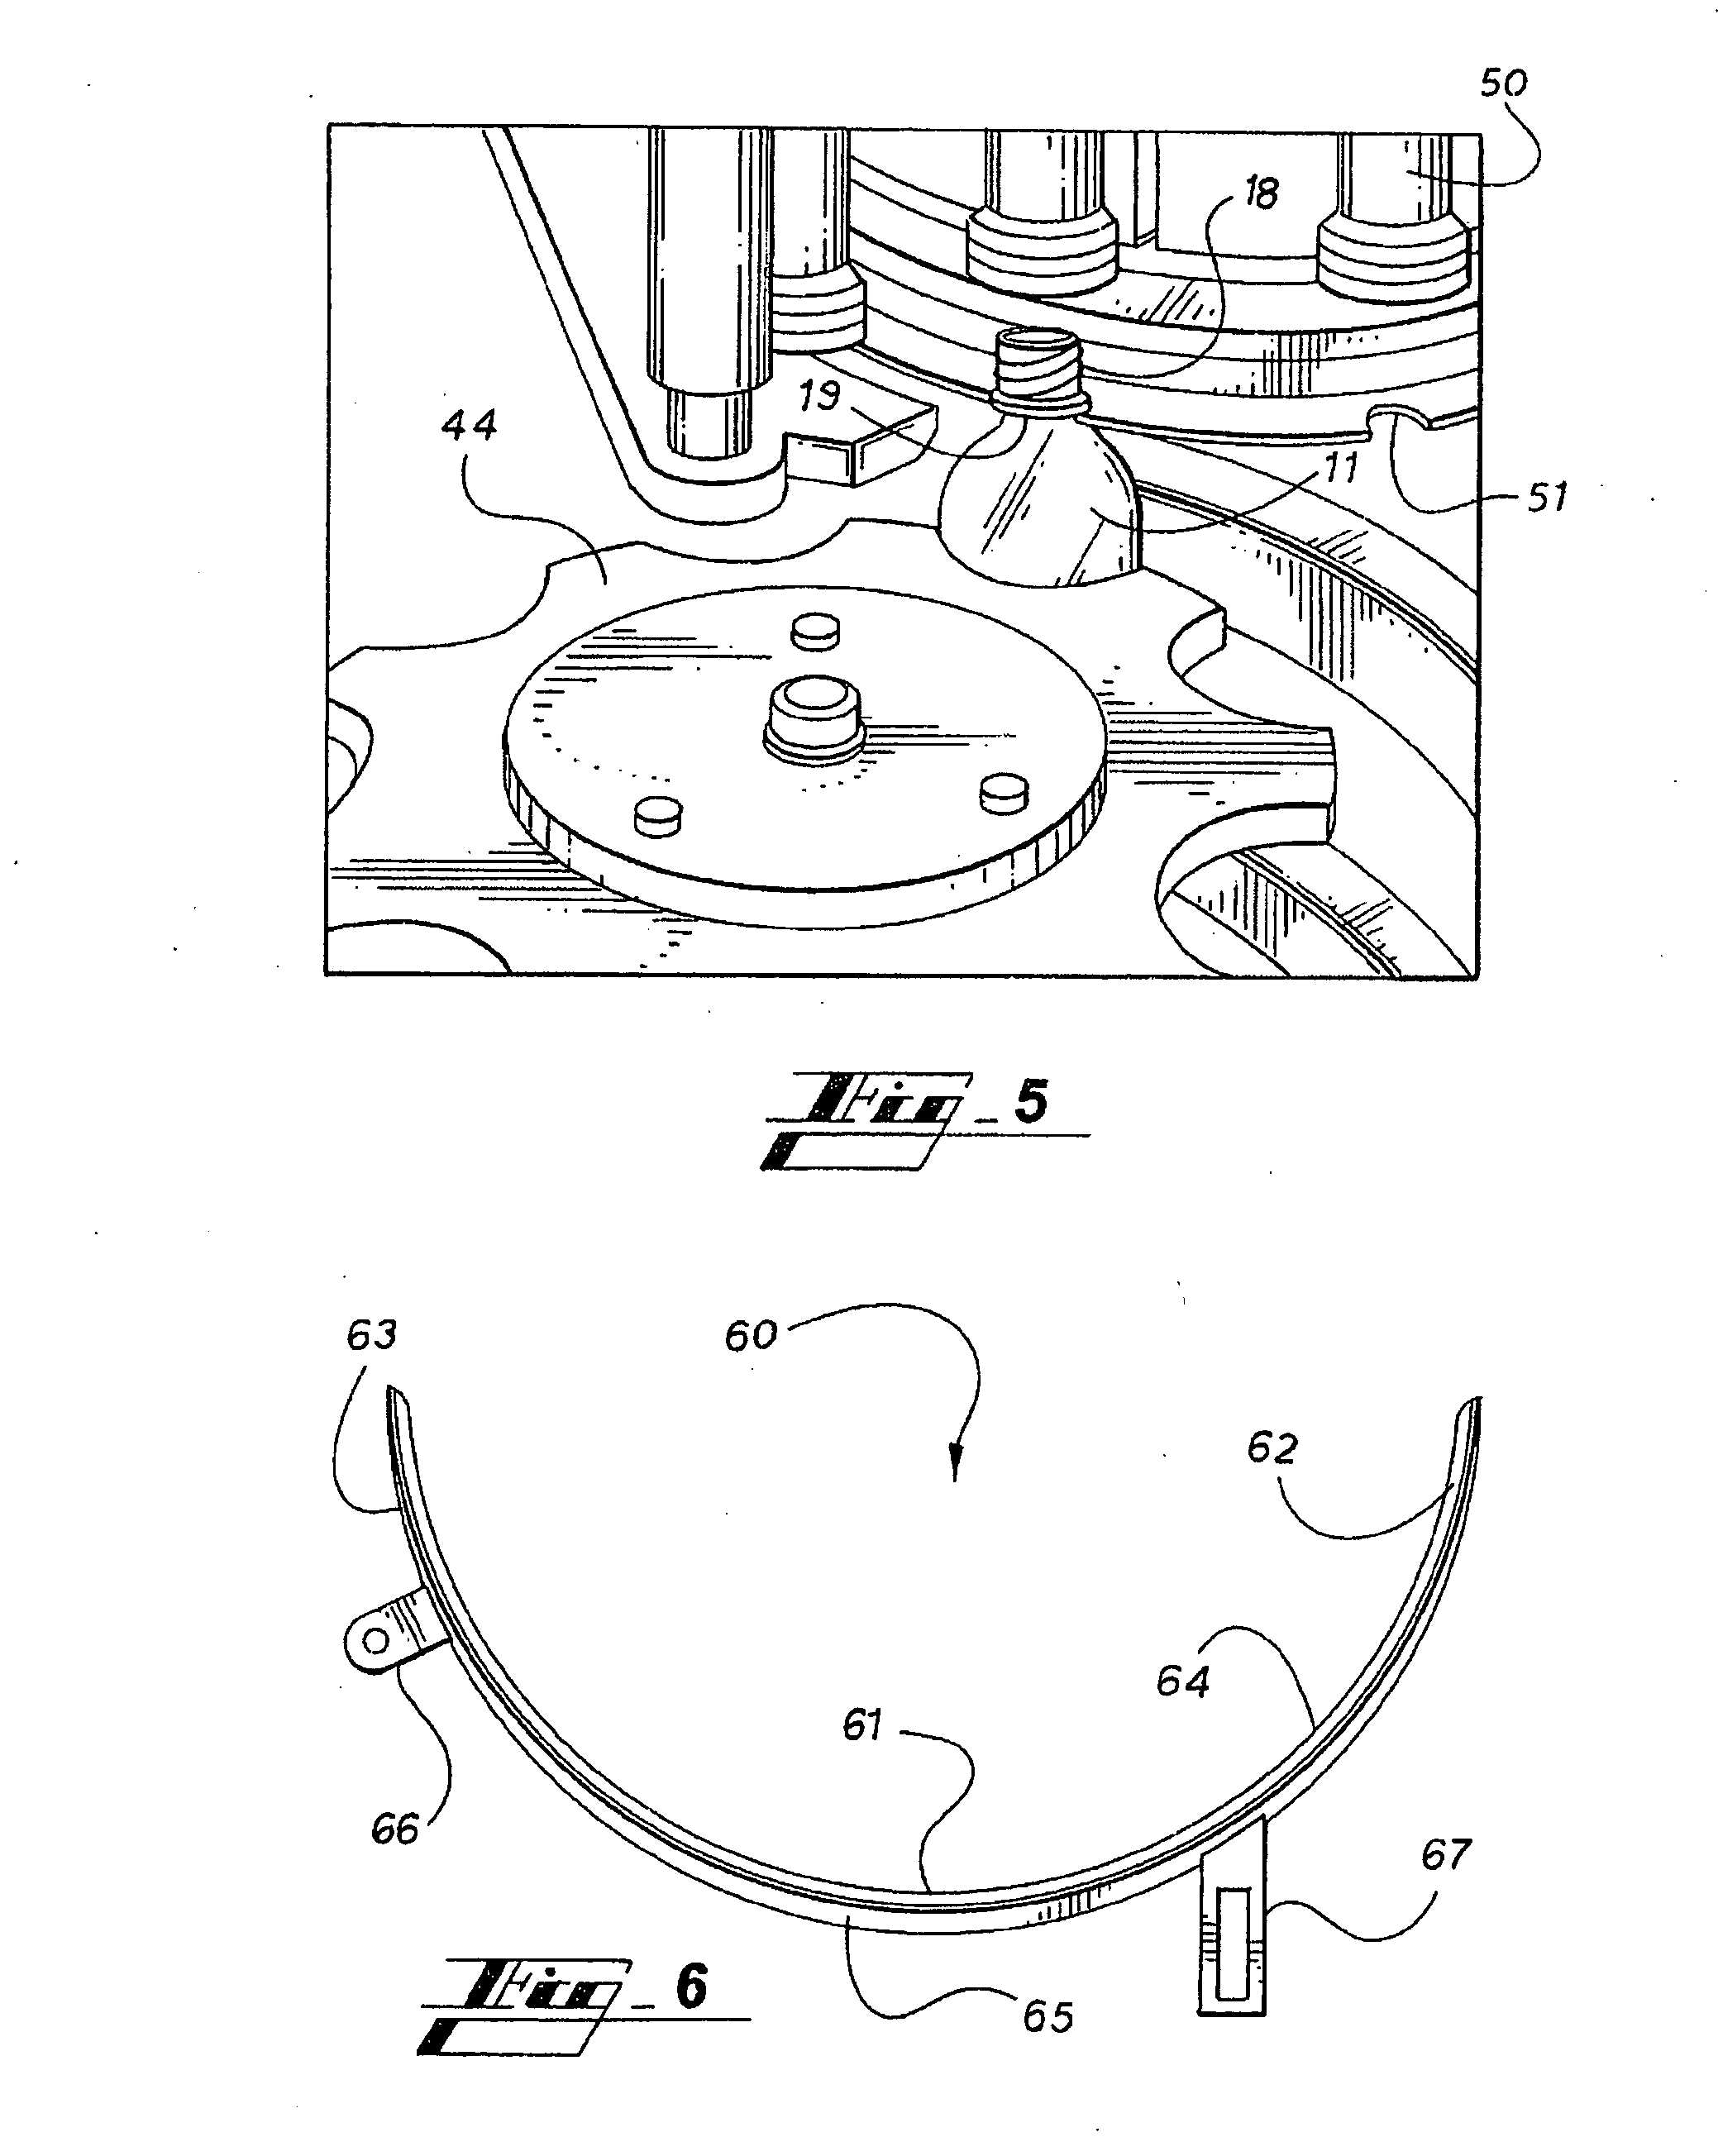 Packaged Bottle Beverage Having an Ingredient Release Closure with Improved Additive Release and Method and Apparatus Thereof